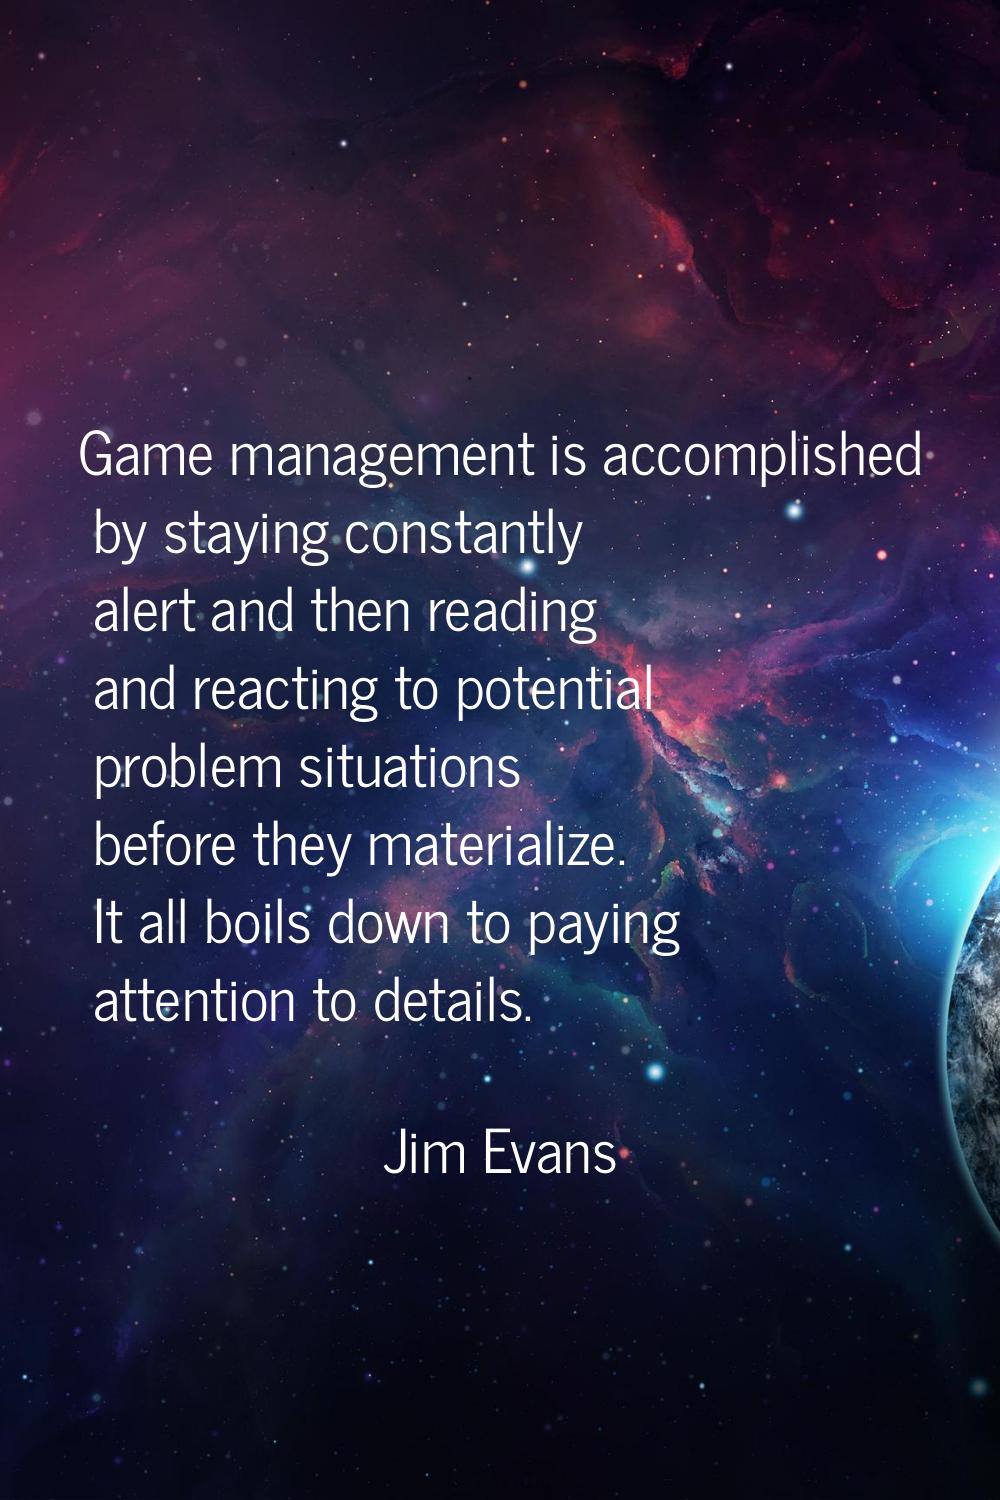 Game management is accomplished by staying constantly alert and then reading and reacting to potent